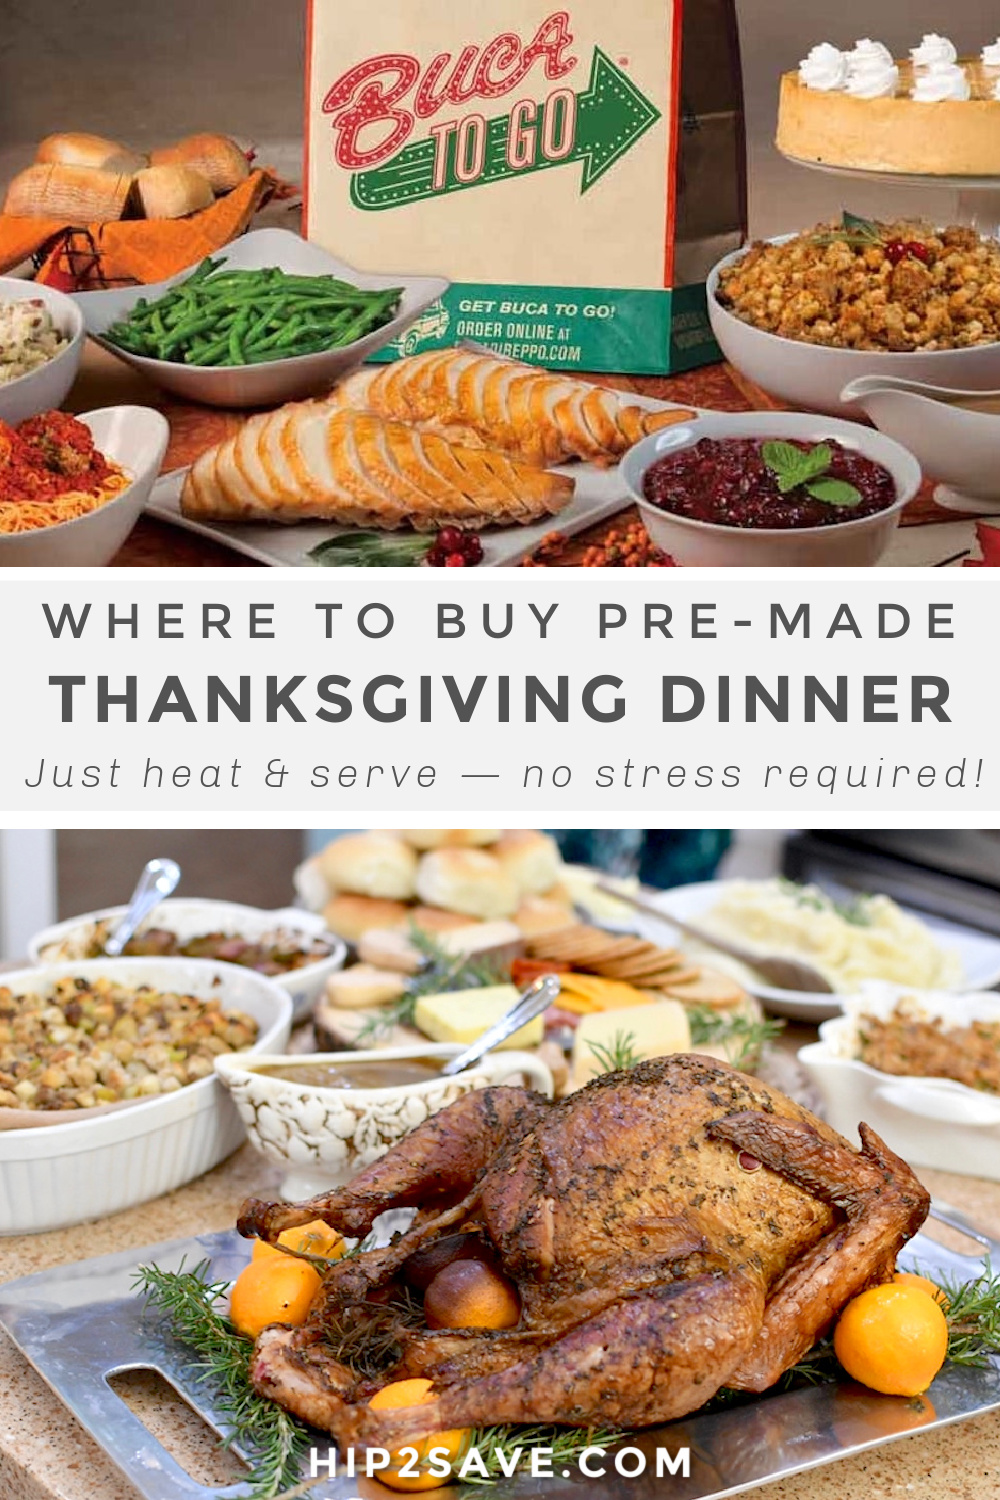 Pre Cooked Thanksgiving Dinner Package : Prepared Thanksgiving Dinners You Can Order Online Or Pick Up / Order thanksgiving dinner to go from one of these places, so you can focus on family.